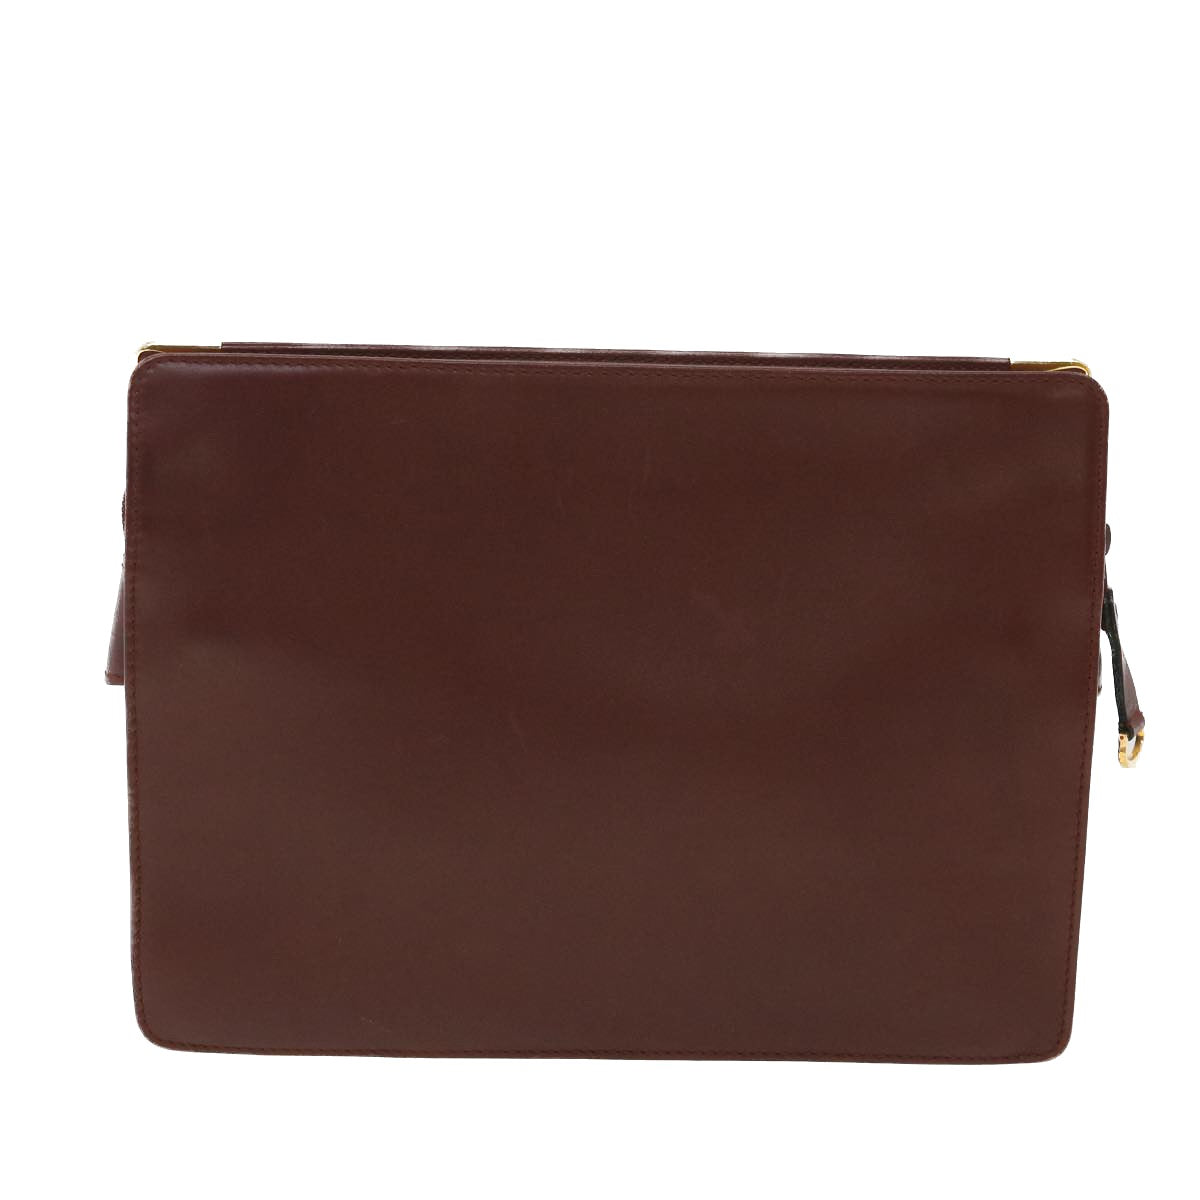 CARTIER Clutch Bag Leather Wine Red Auth 33854 - 0